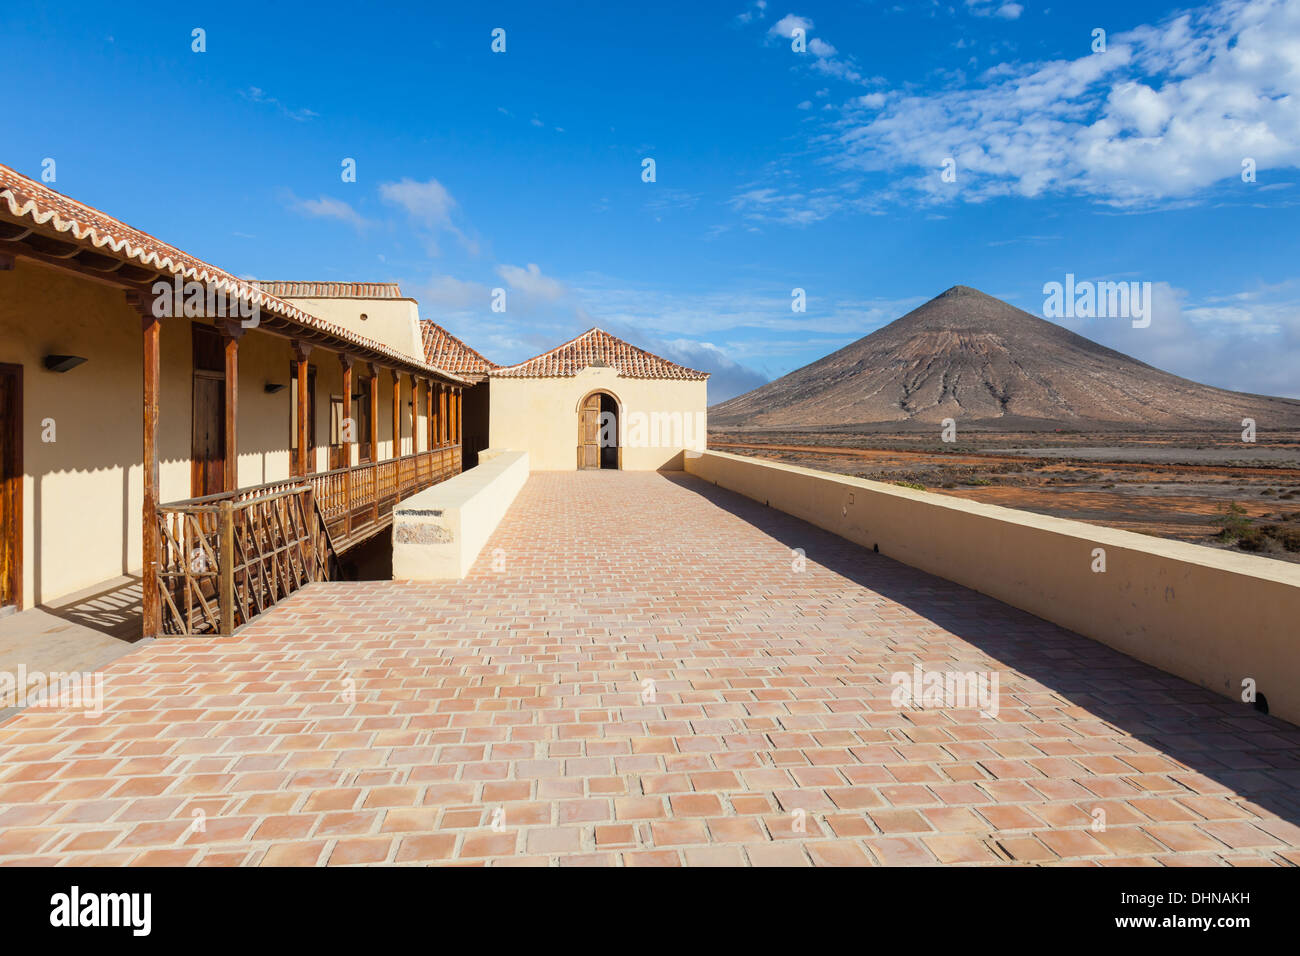 Colonial architecture and the volcano on the horizon Stock Photo